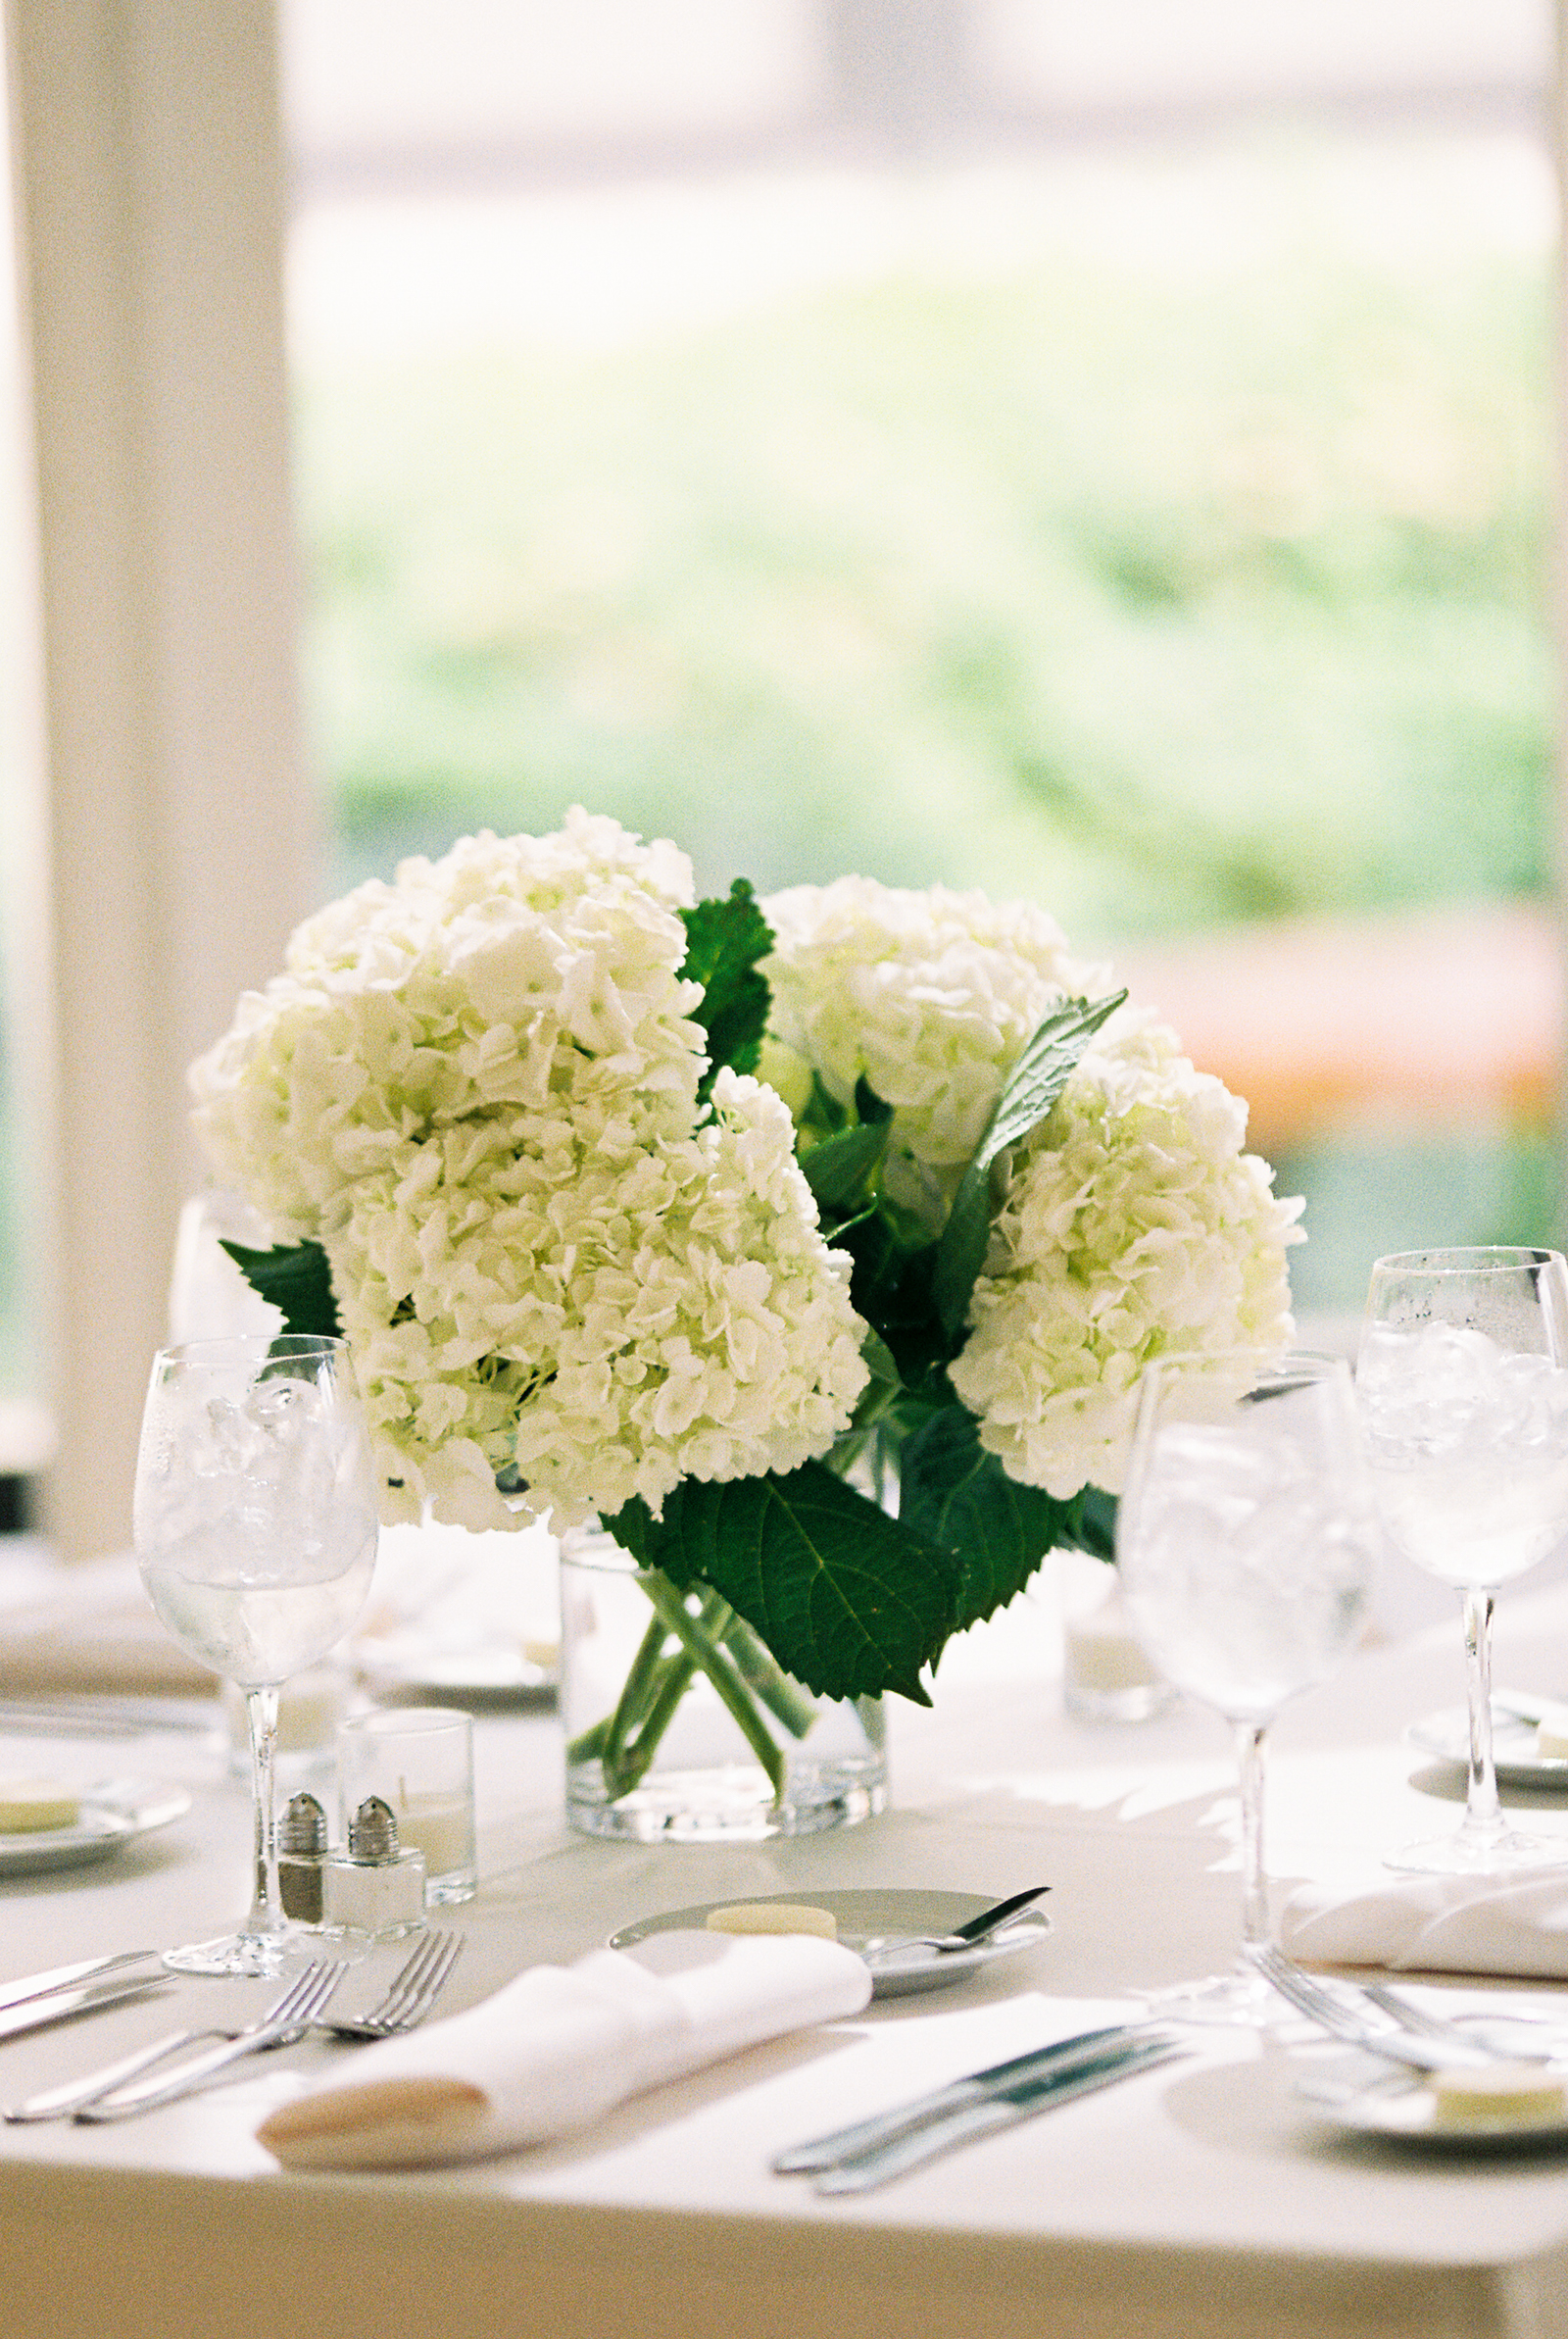 Ethereal minimalist wedding with white hydrangea centerpieces for reception at Greenhouse Loft Chicago.